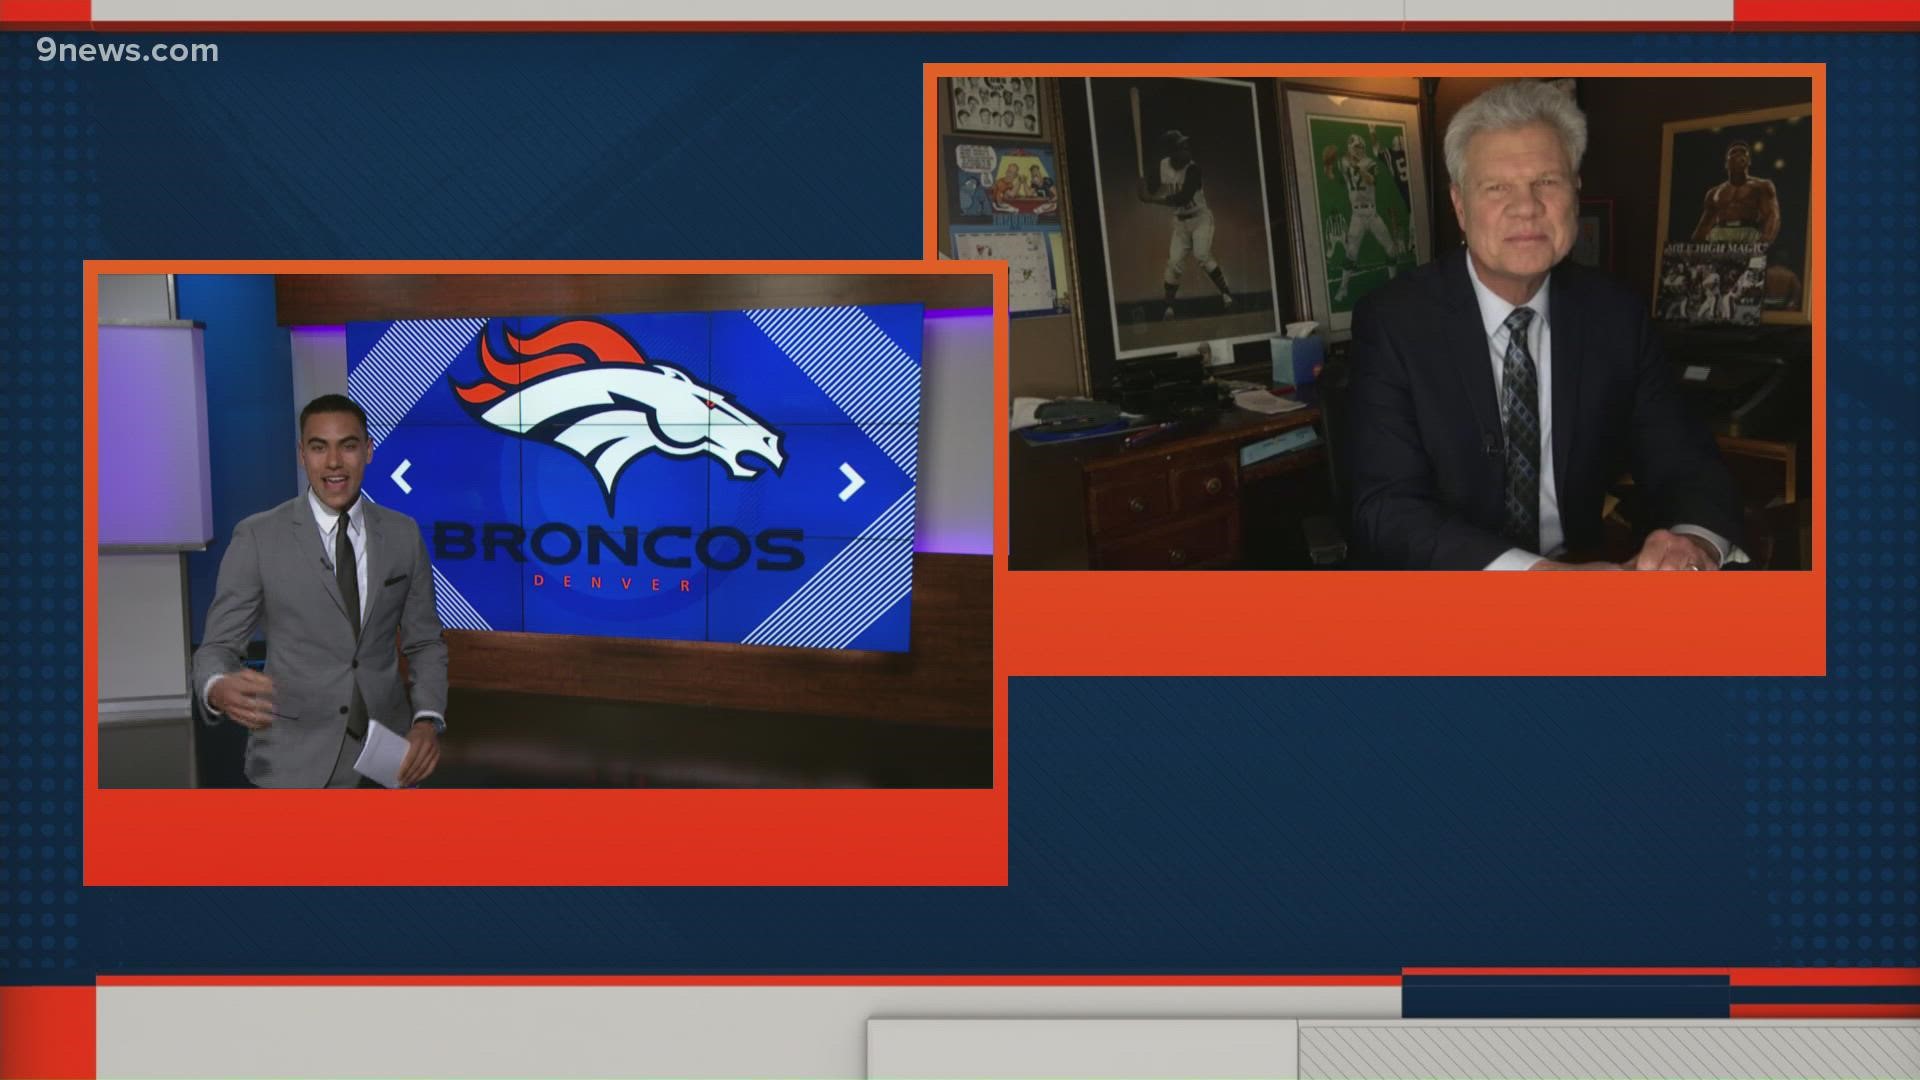 Mike Klis joined Jacob Tobey to give an update on the Denver Broncos' search for their next head coach.